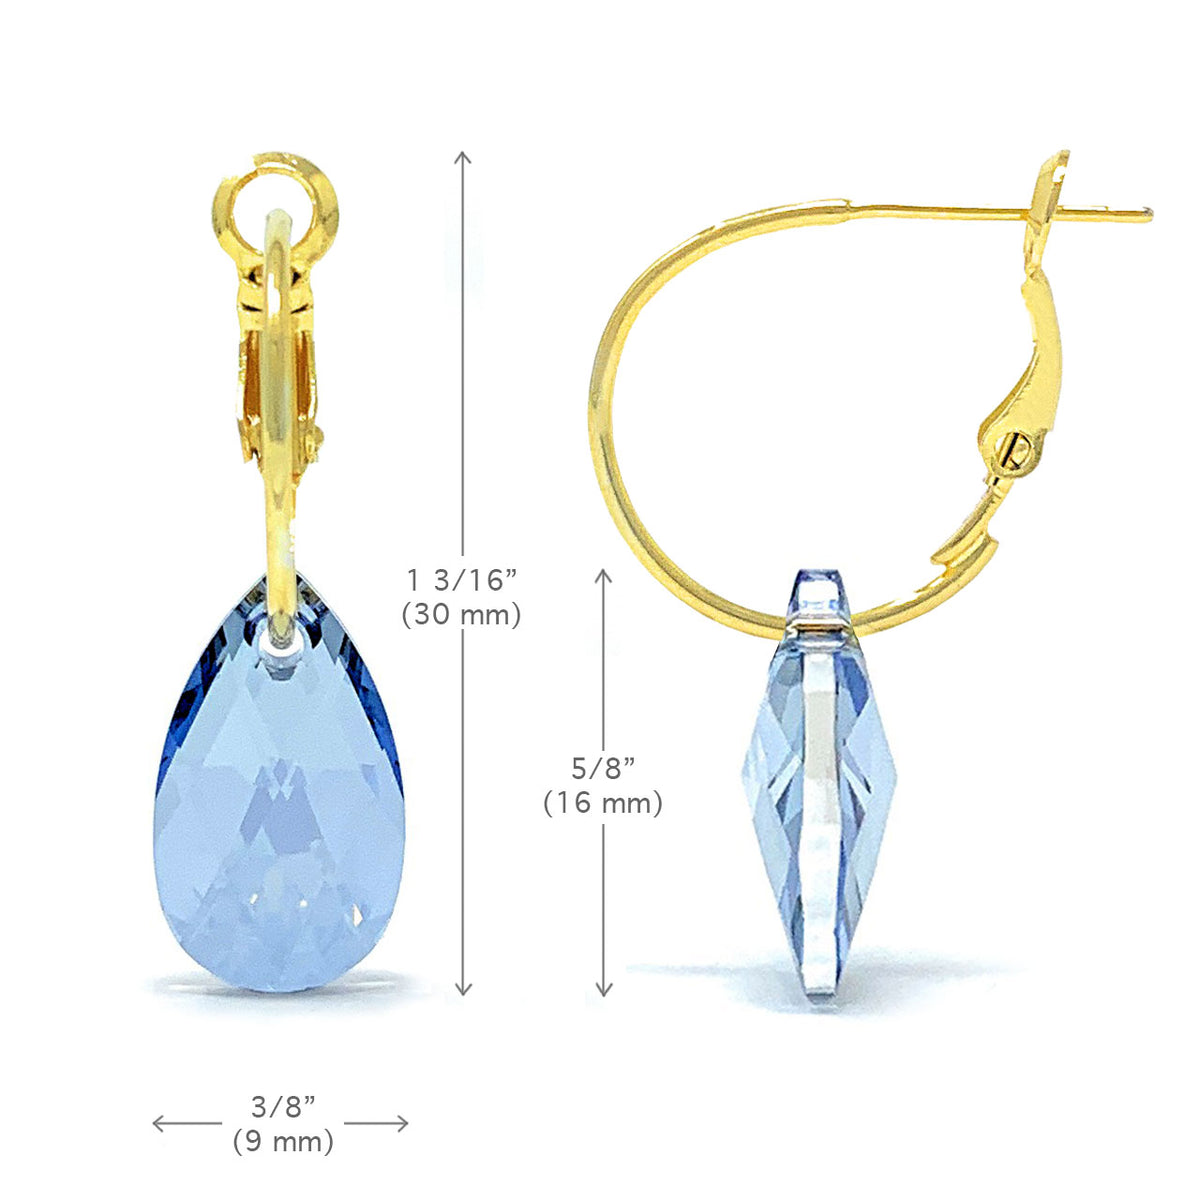 Aurora Small Drop Earrings with Grey Blue Shade Pear Crystals from Swarovski Gold Plated - Ed Heart